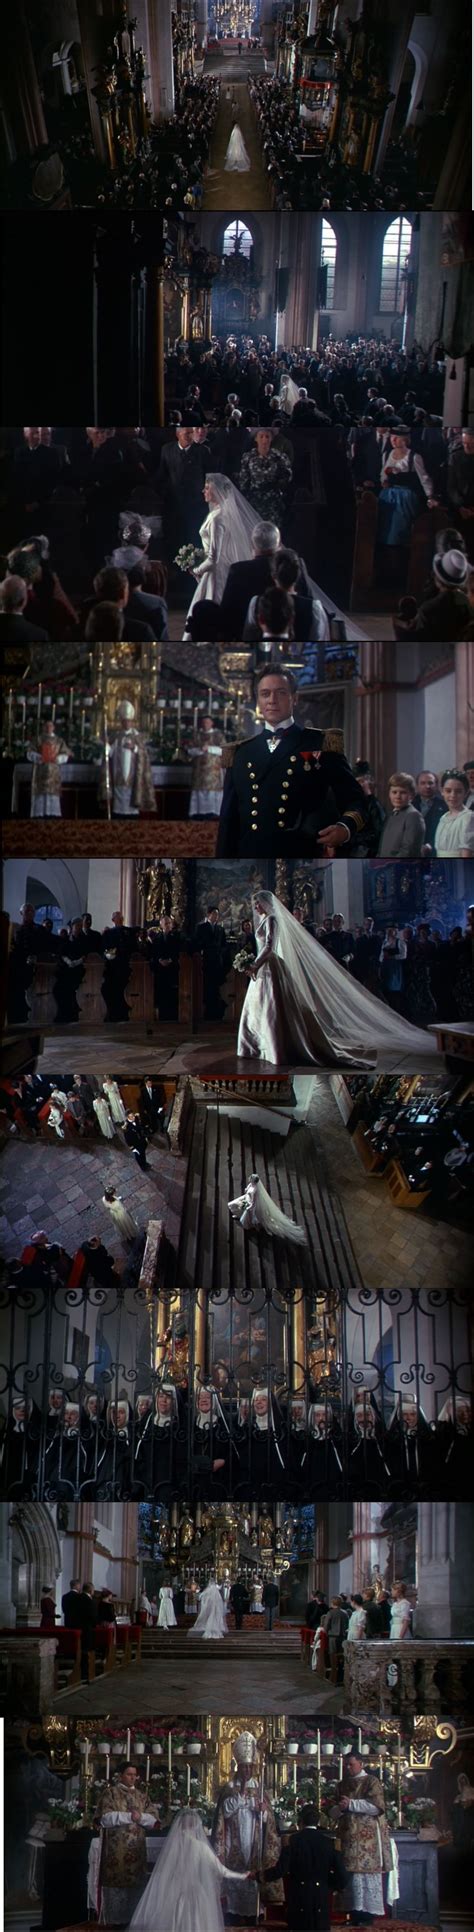 The Sound Of Music 1965 Maria Getting Married To Captain Von Trapp While The Song Maria As